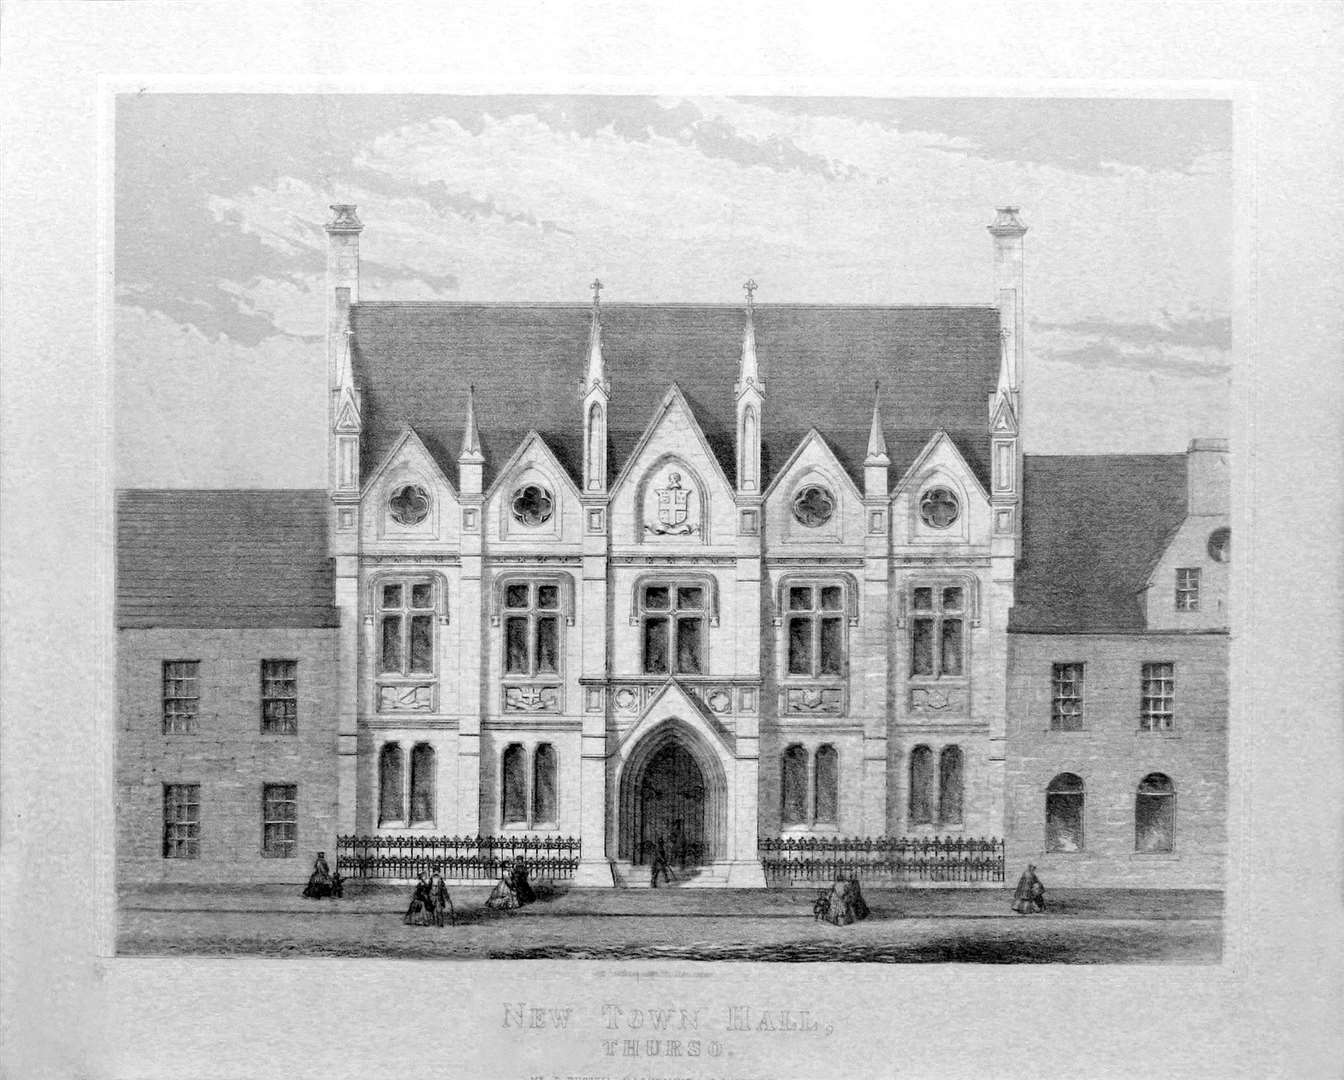 Russell MacKenzie’s drawing of the front elevation of Thurso Town Hall.